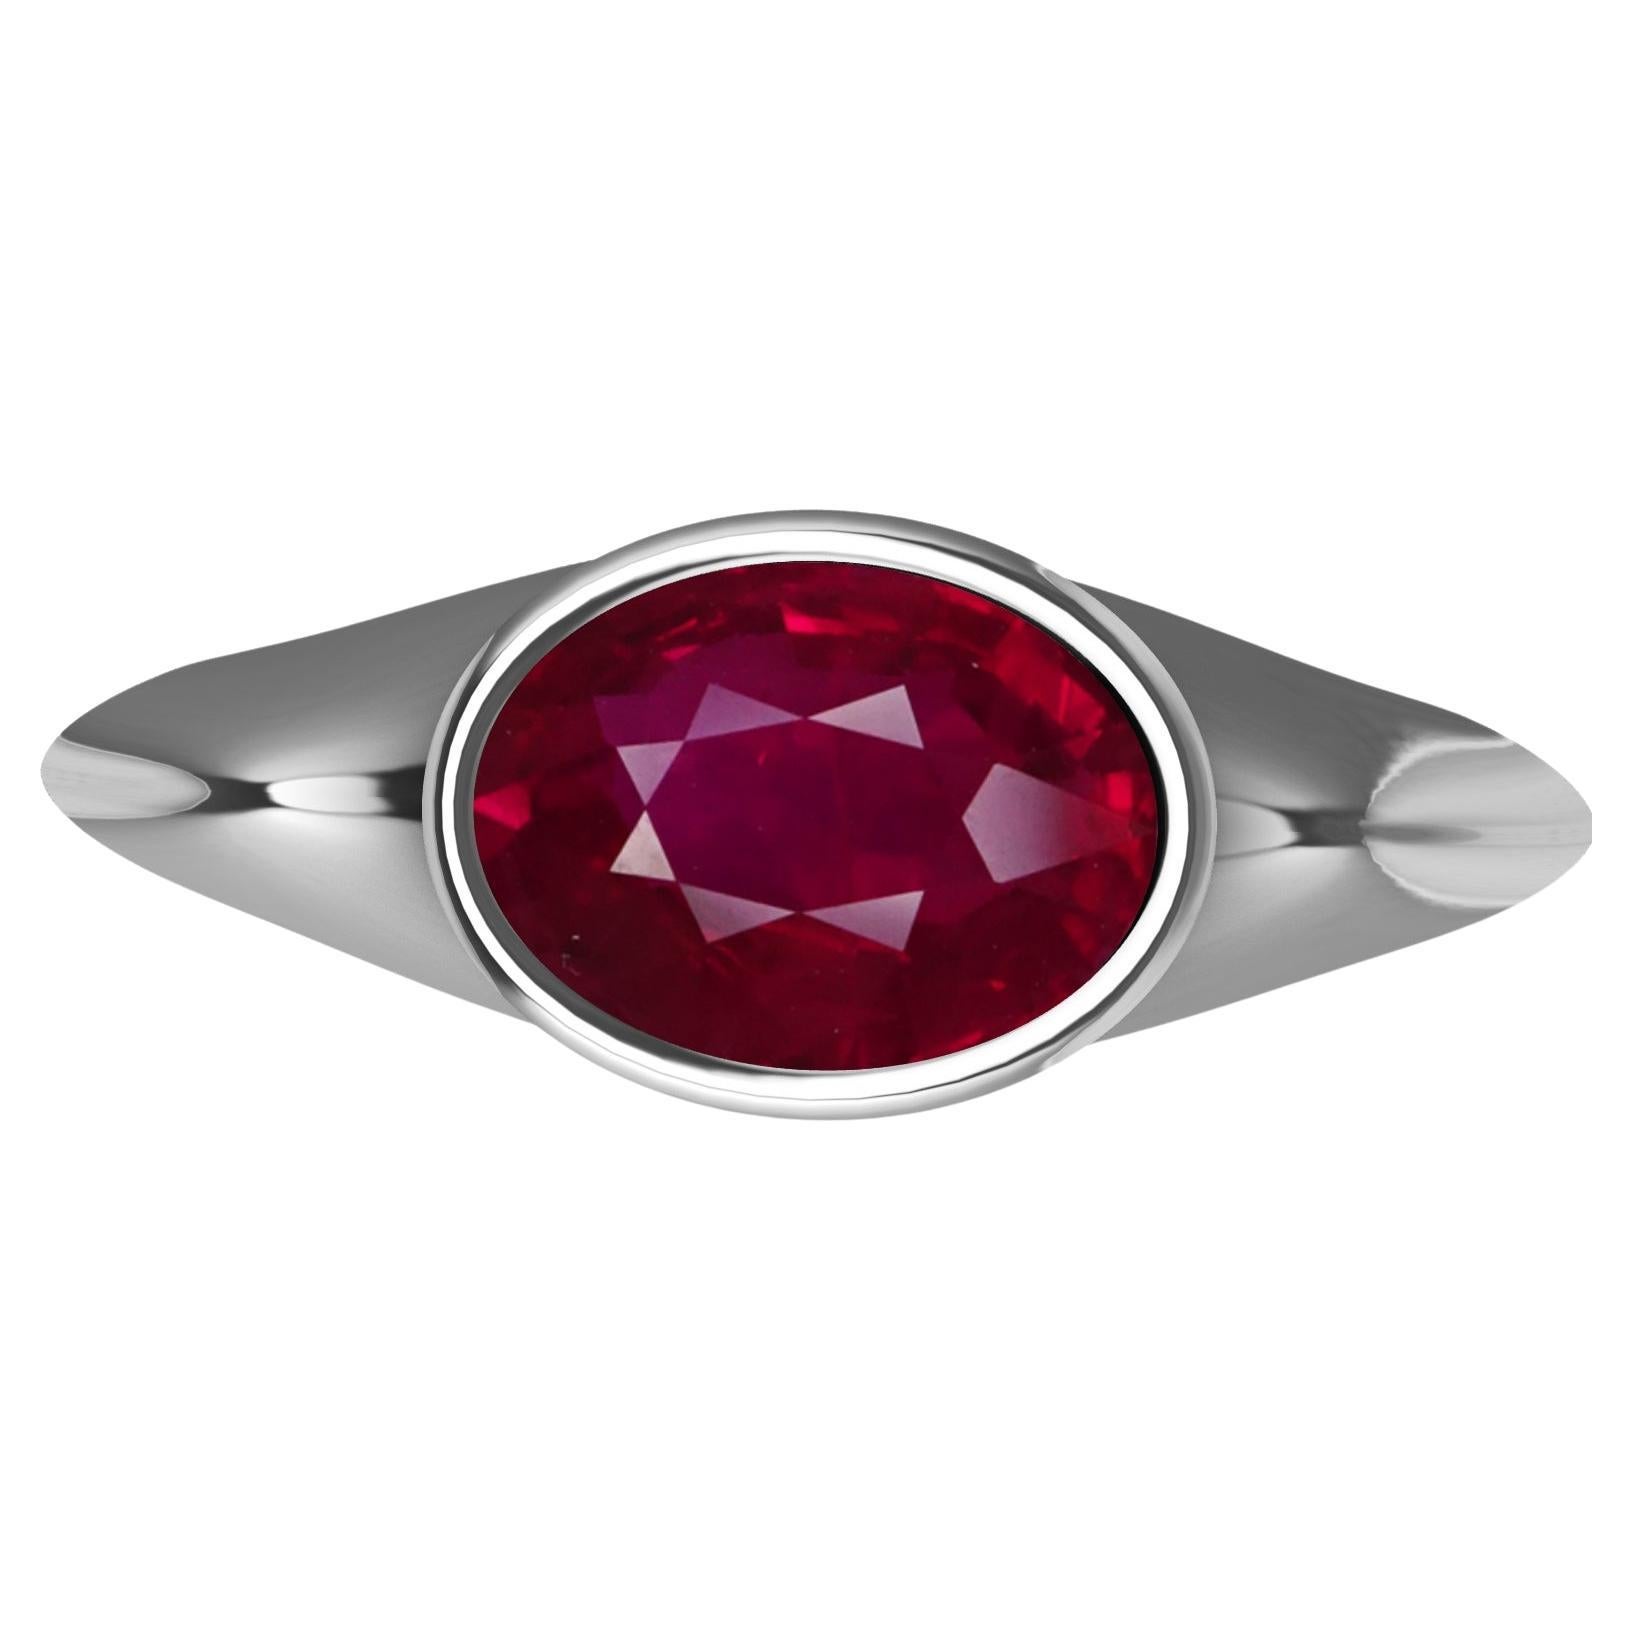 For Sale:  18 Karat White Gold 2.58 Carats Pigeon Blood Ruby Sculpture Ring